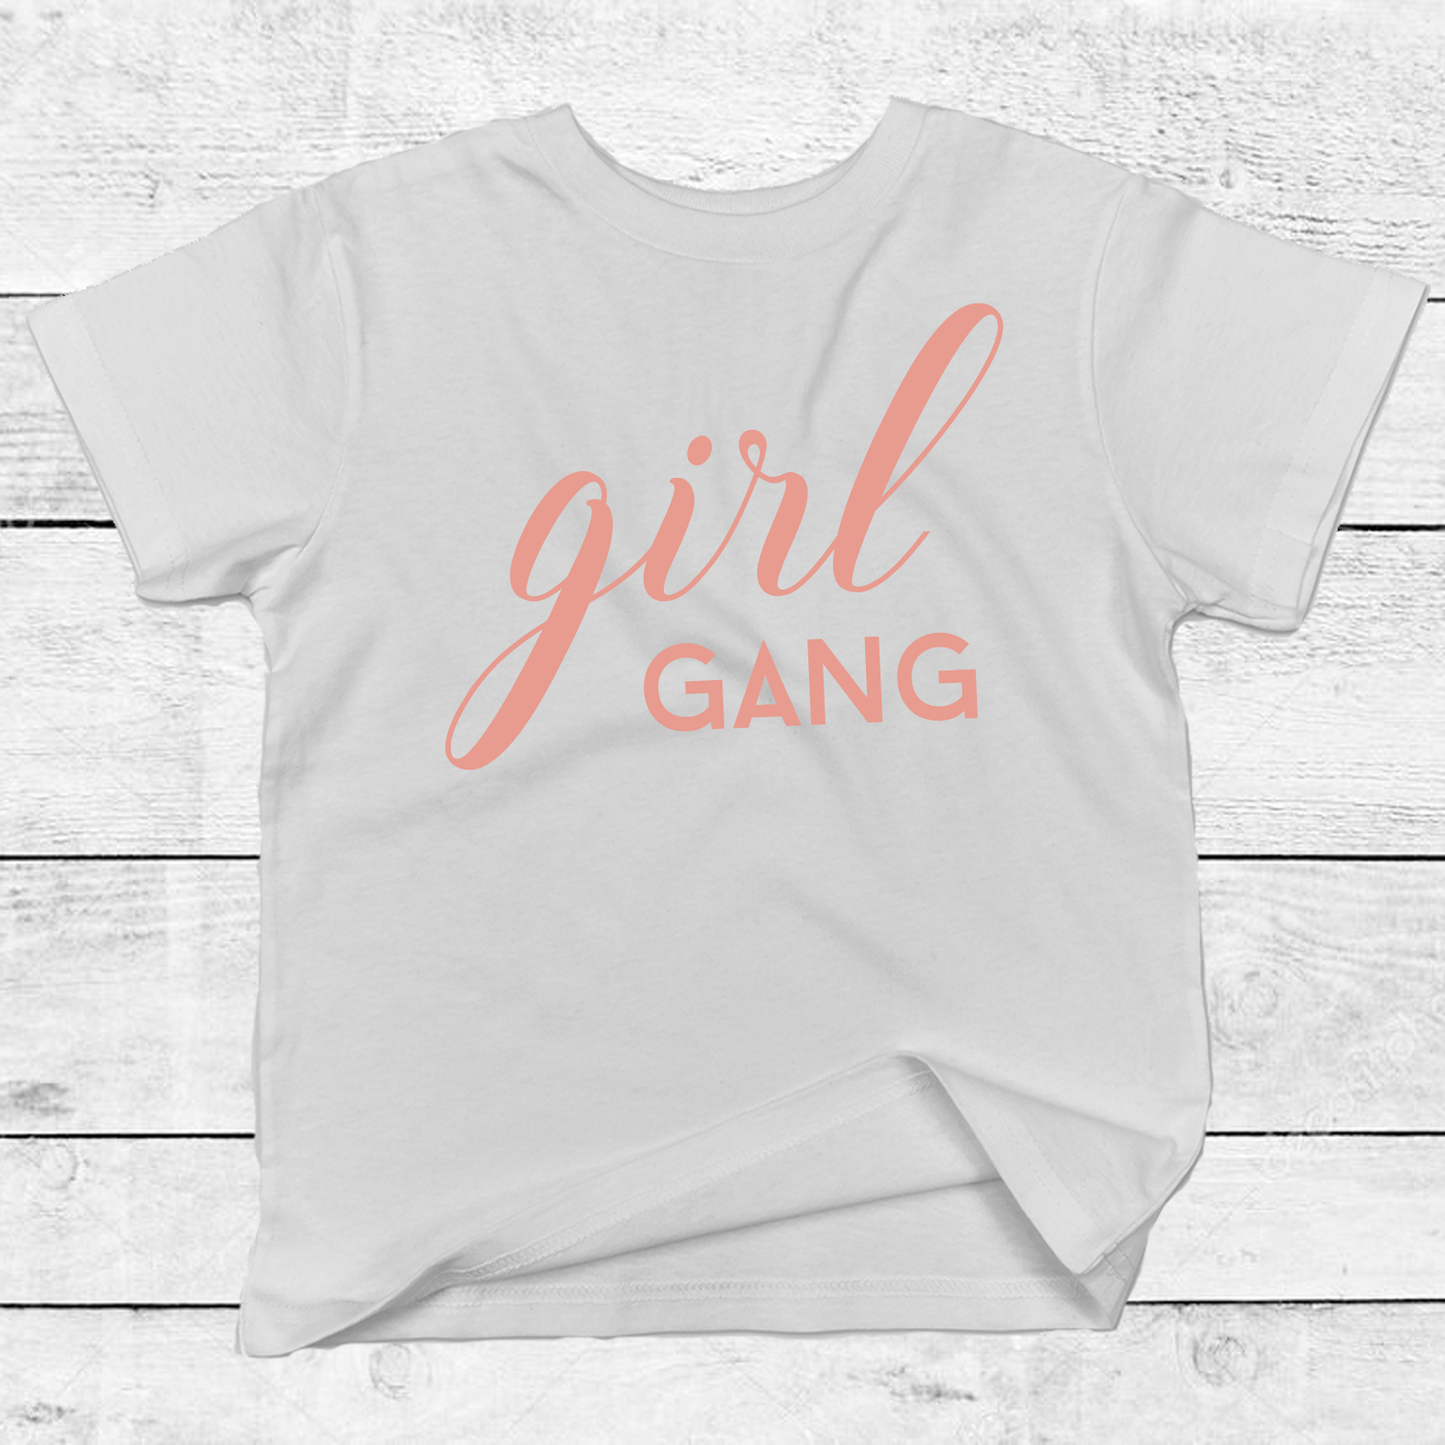 Girl Gang white T-Shirt   Top baby, toddler and kids sizes